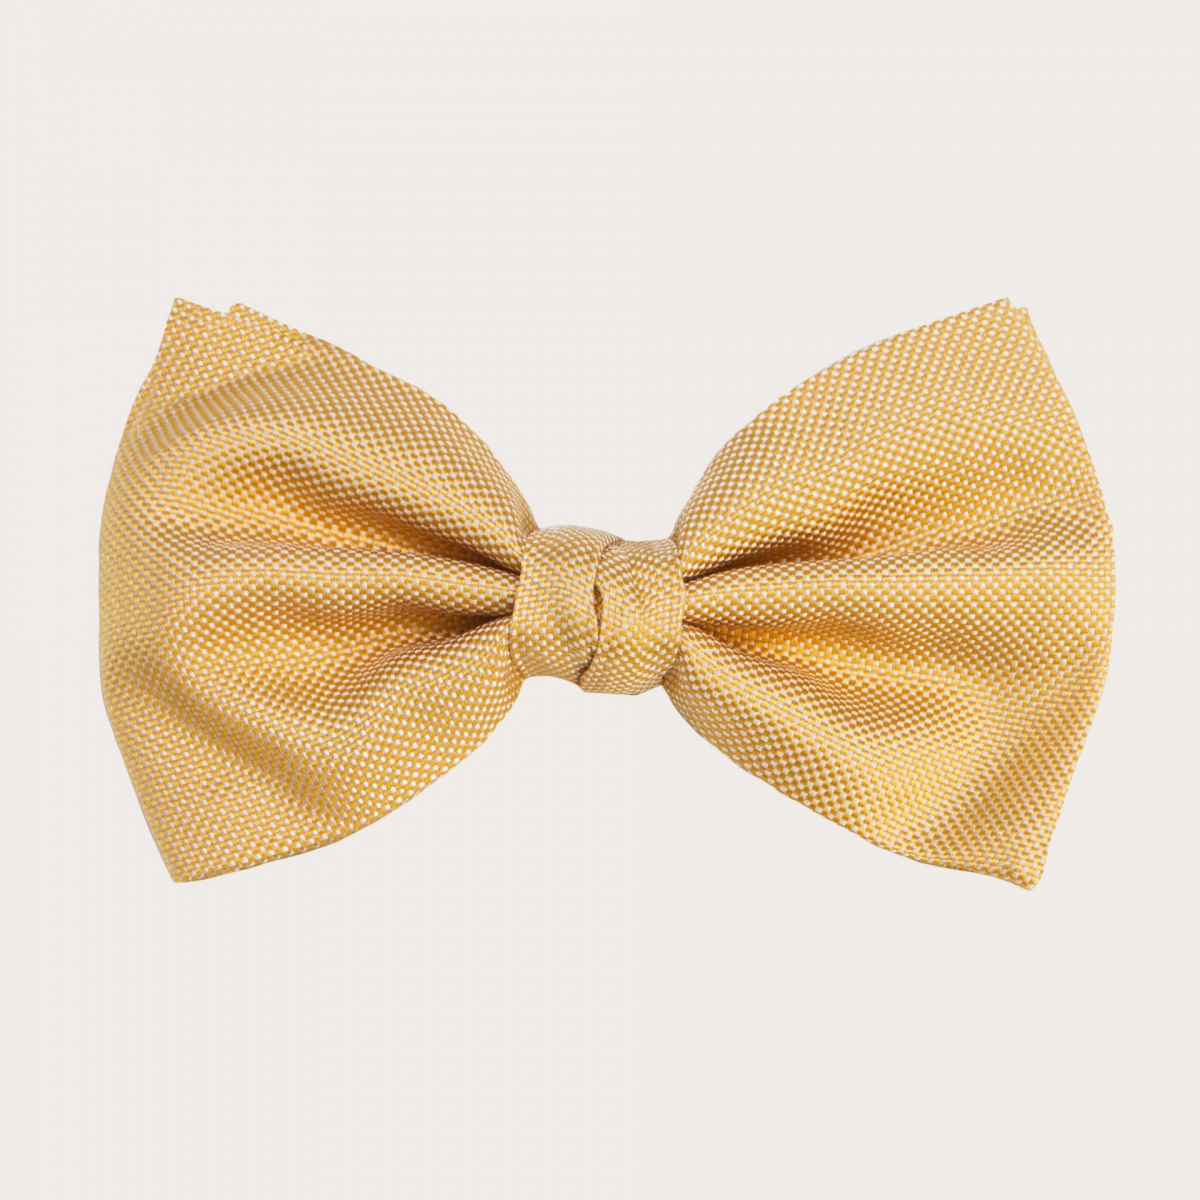 BRUCLE Bow tie in jacquard silk, yellow